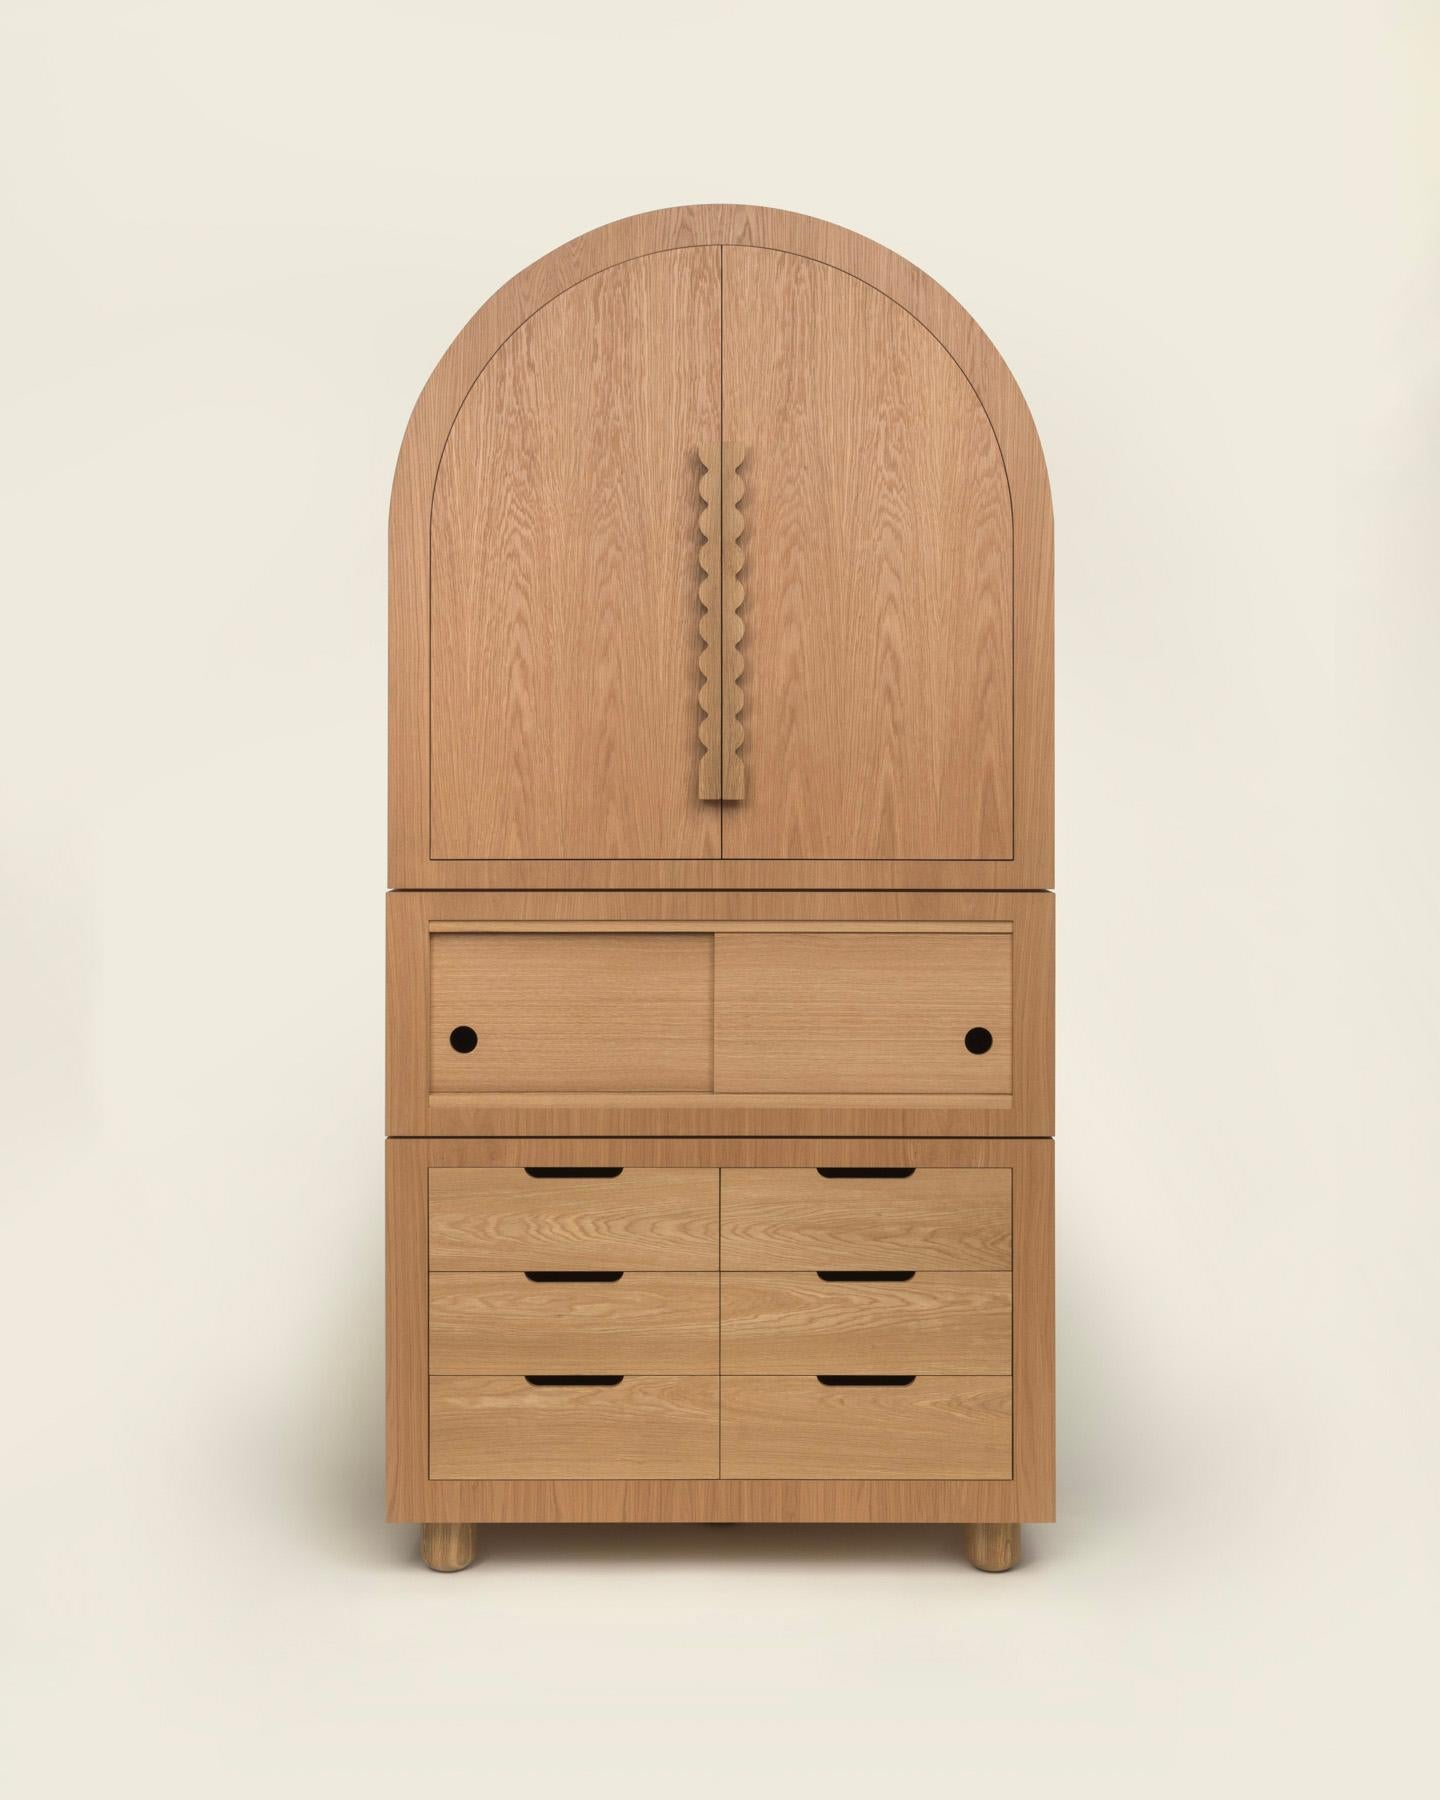 Turned Jackson Highboy Modern Art Deco and Memphis Inspired Armoire in White Oak